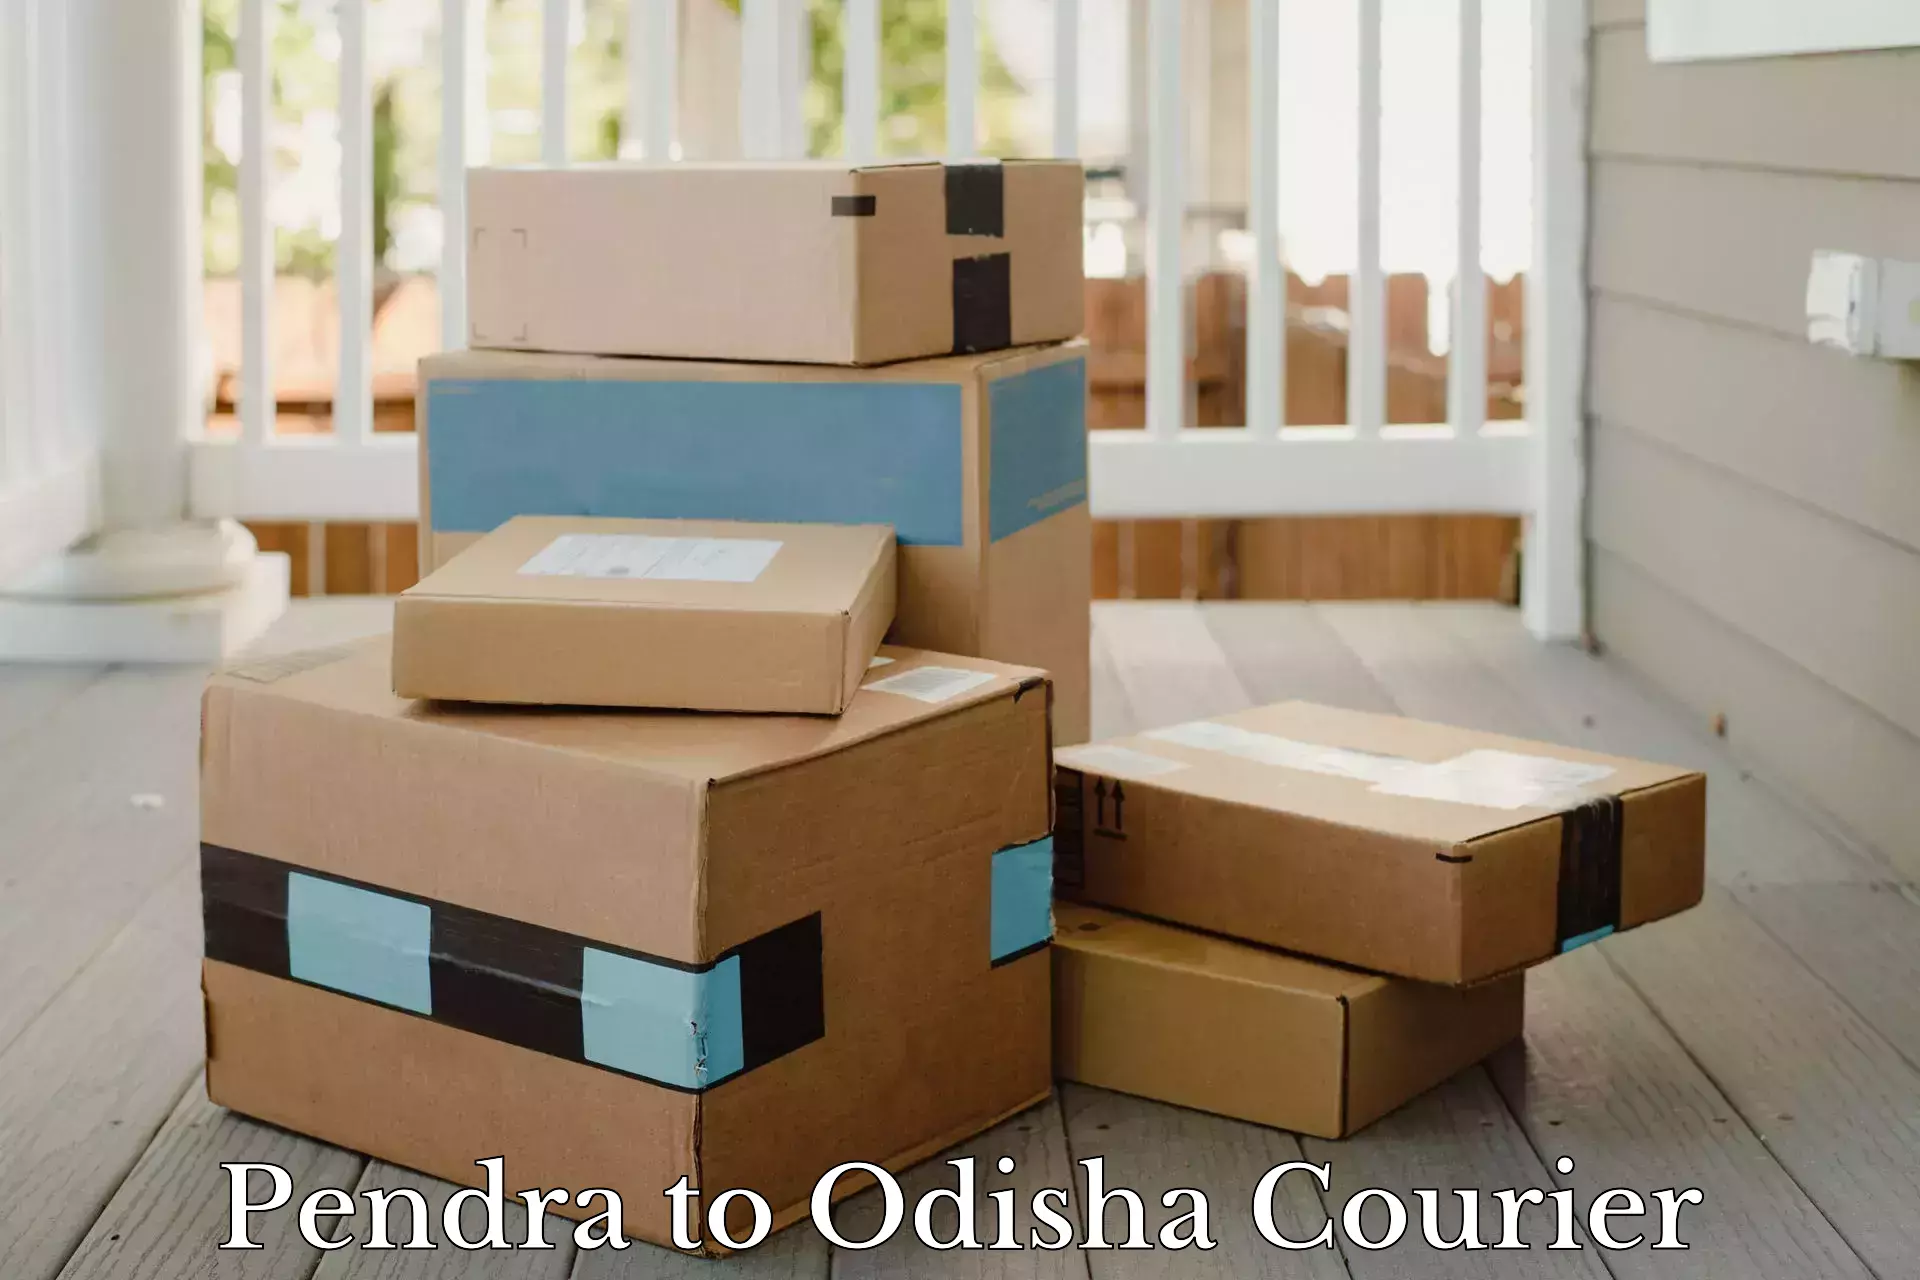 Advanced parcel tracking in Pendra to Odisha